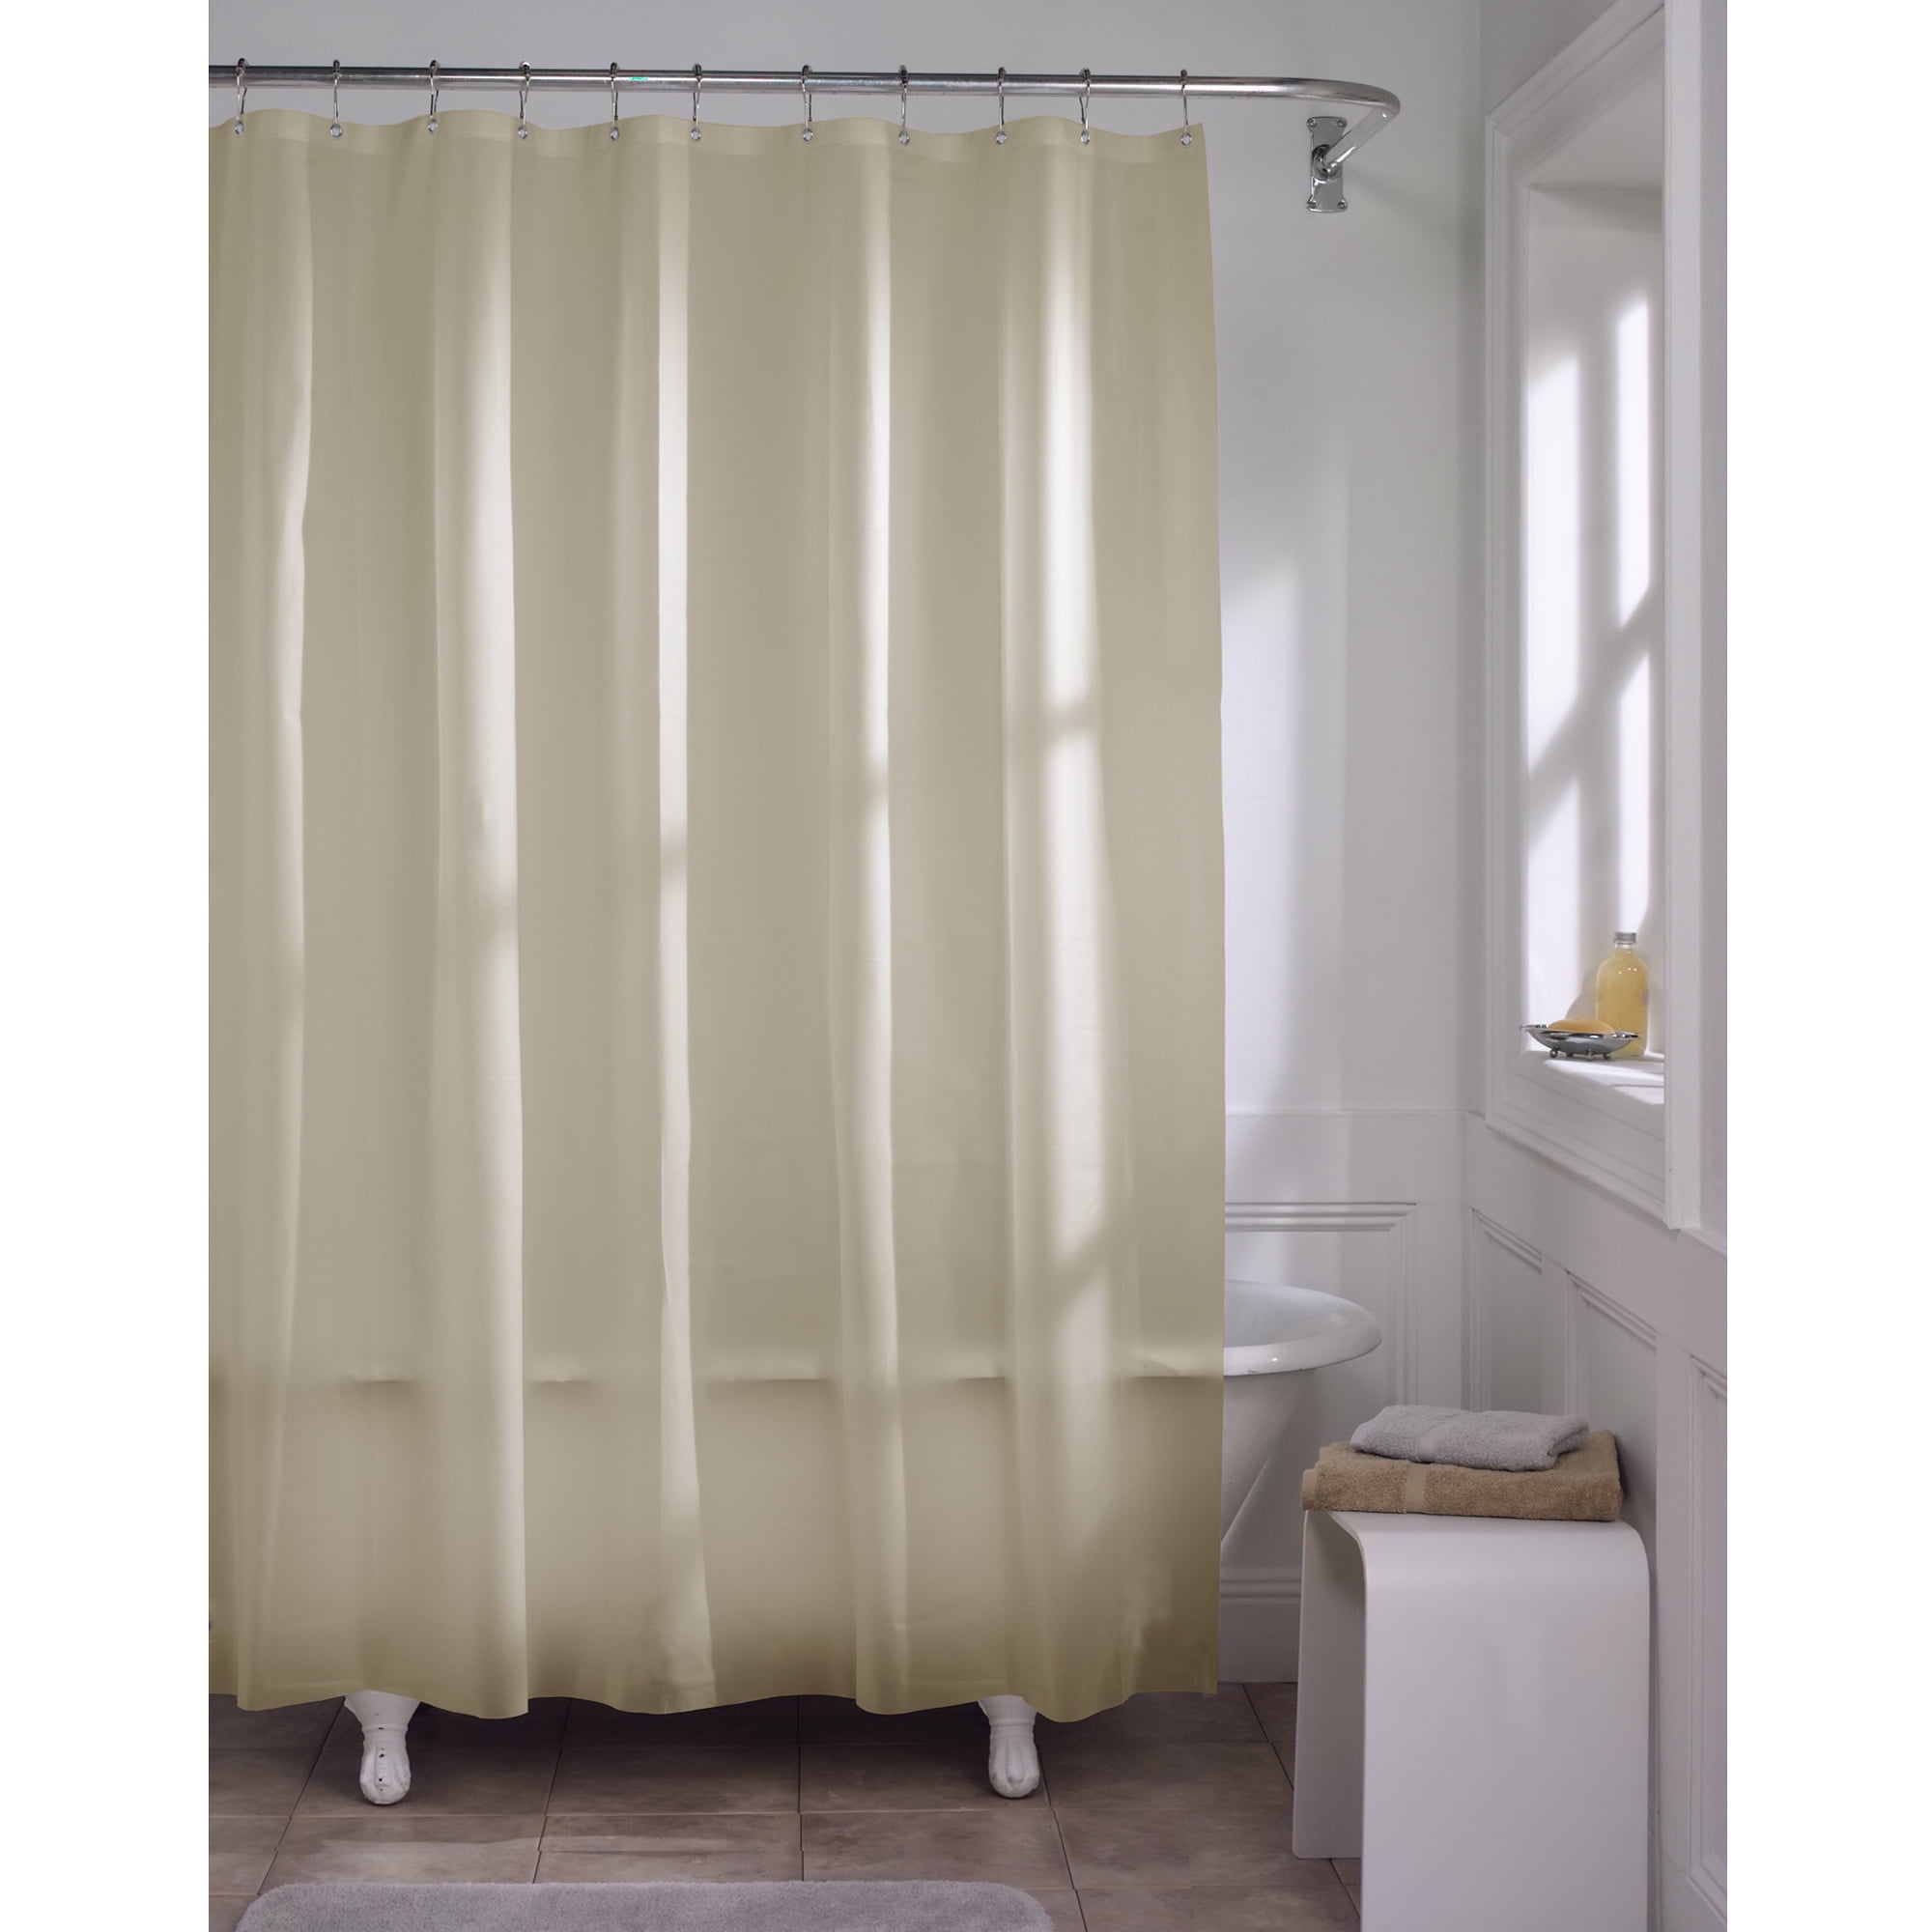 Deluxe Quality Shower Curtain Liner Beige 70"W x 72"L Mildew Resistant USA Ship 